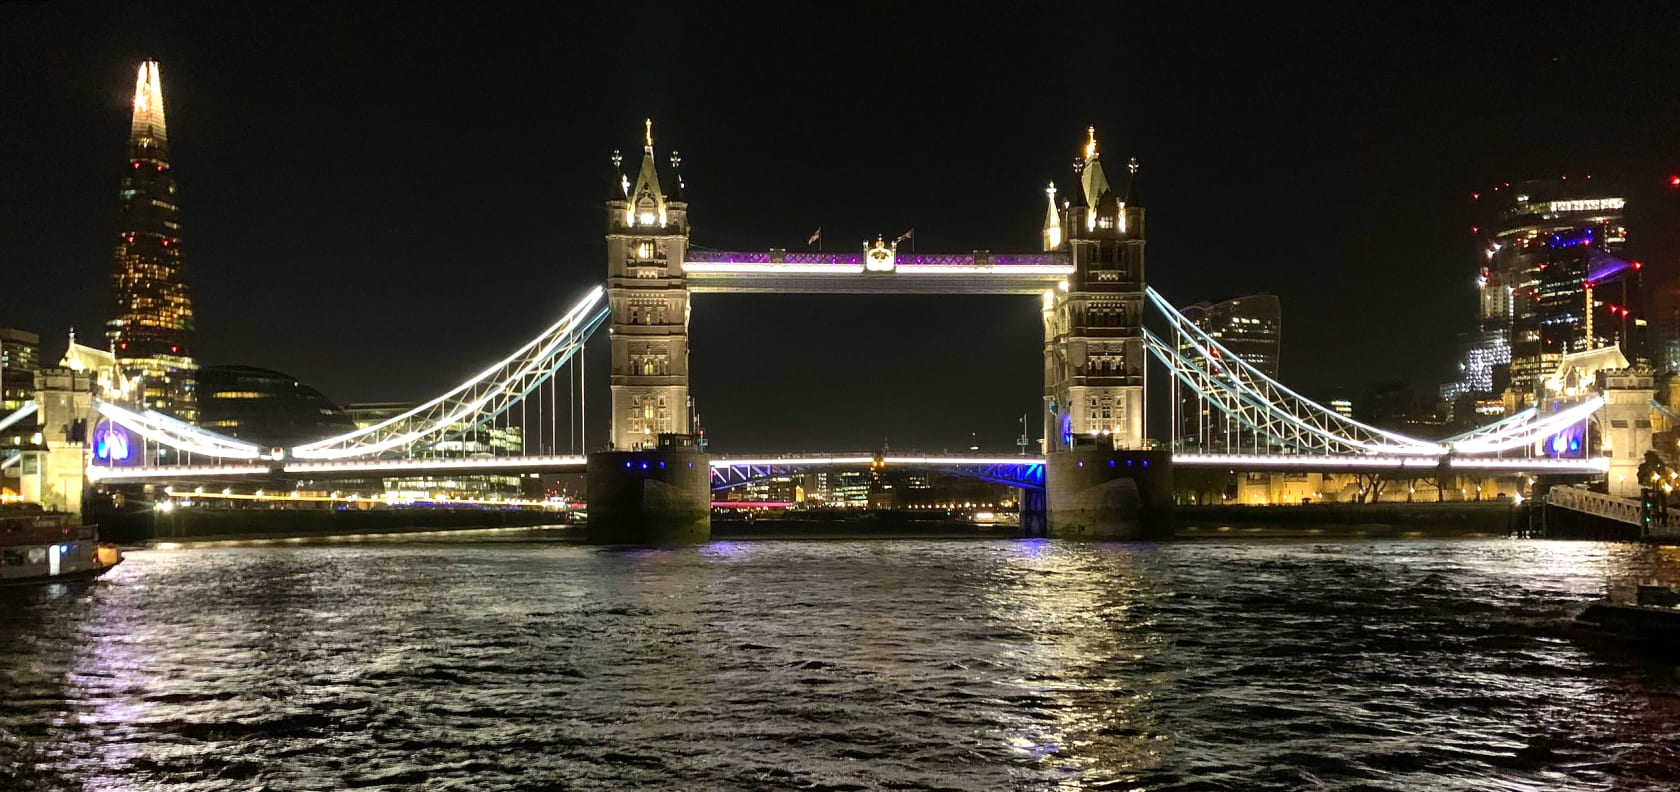 The Tower Bridge in London at night.